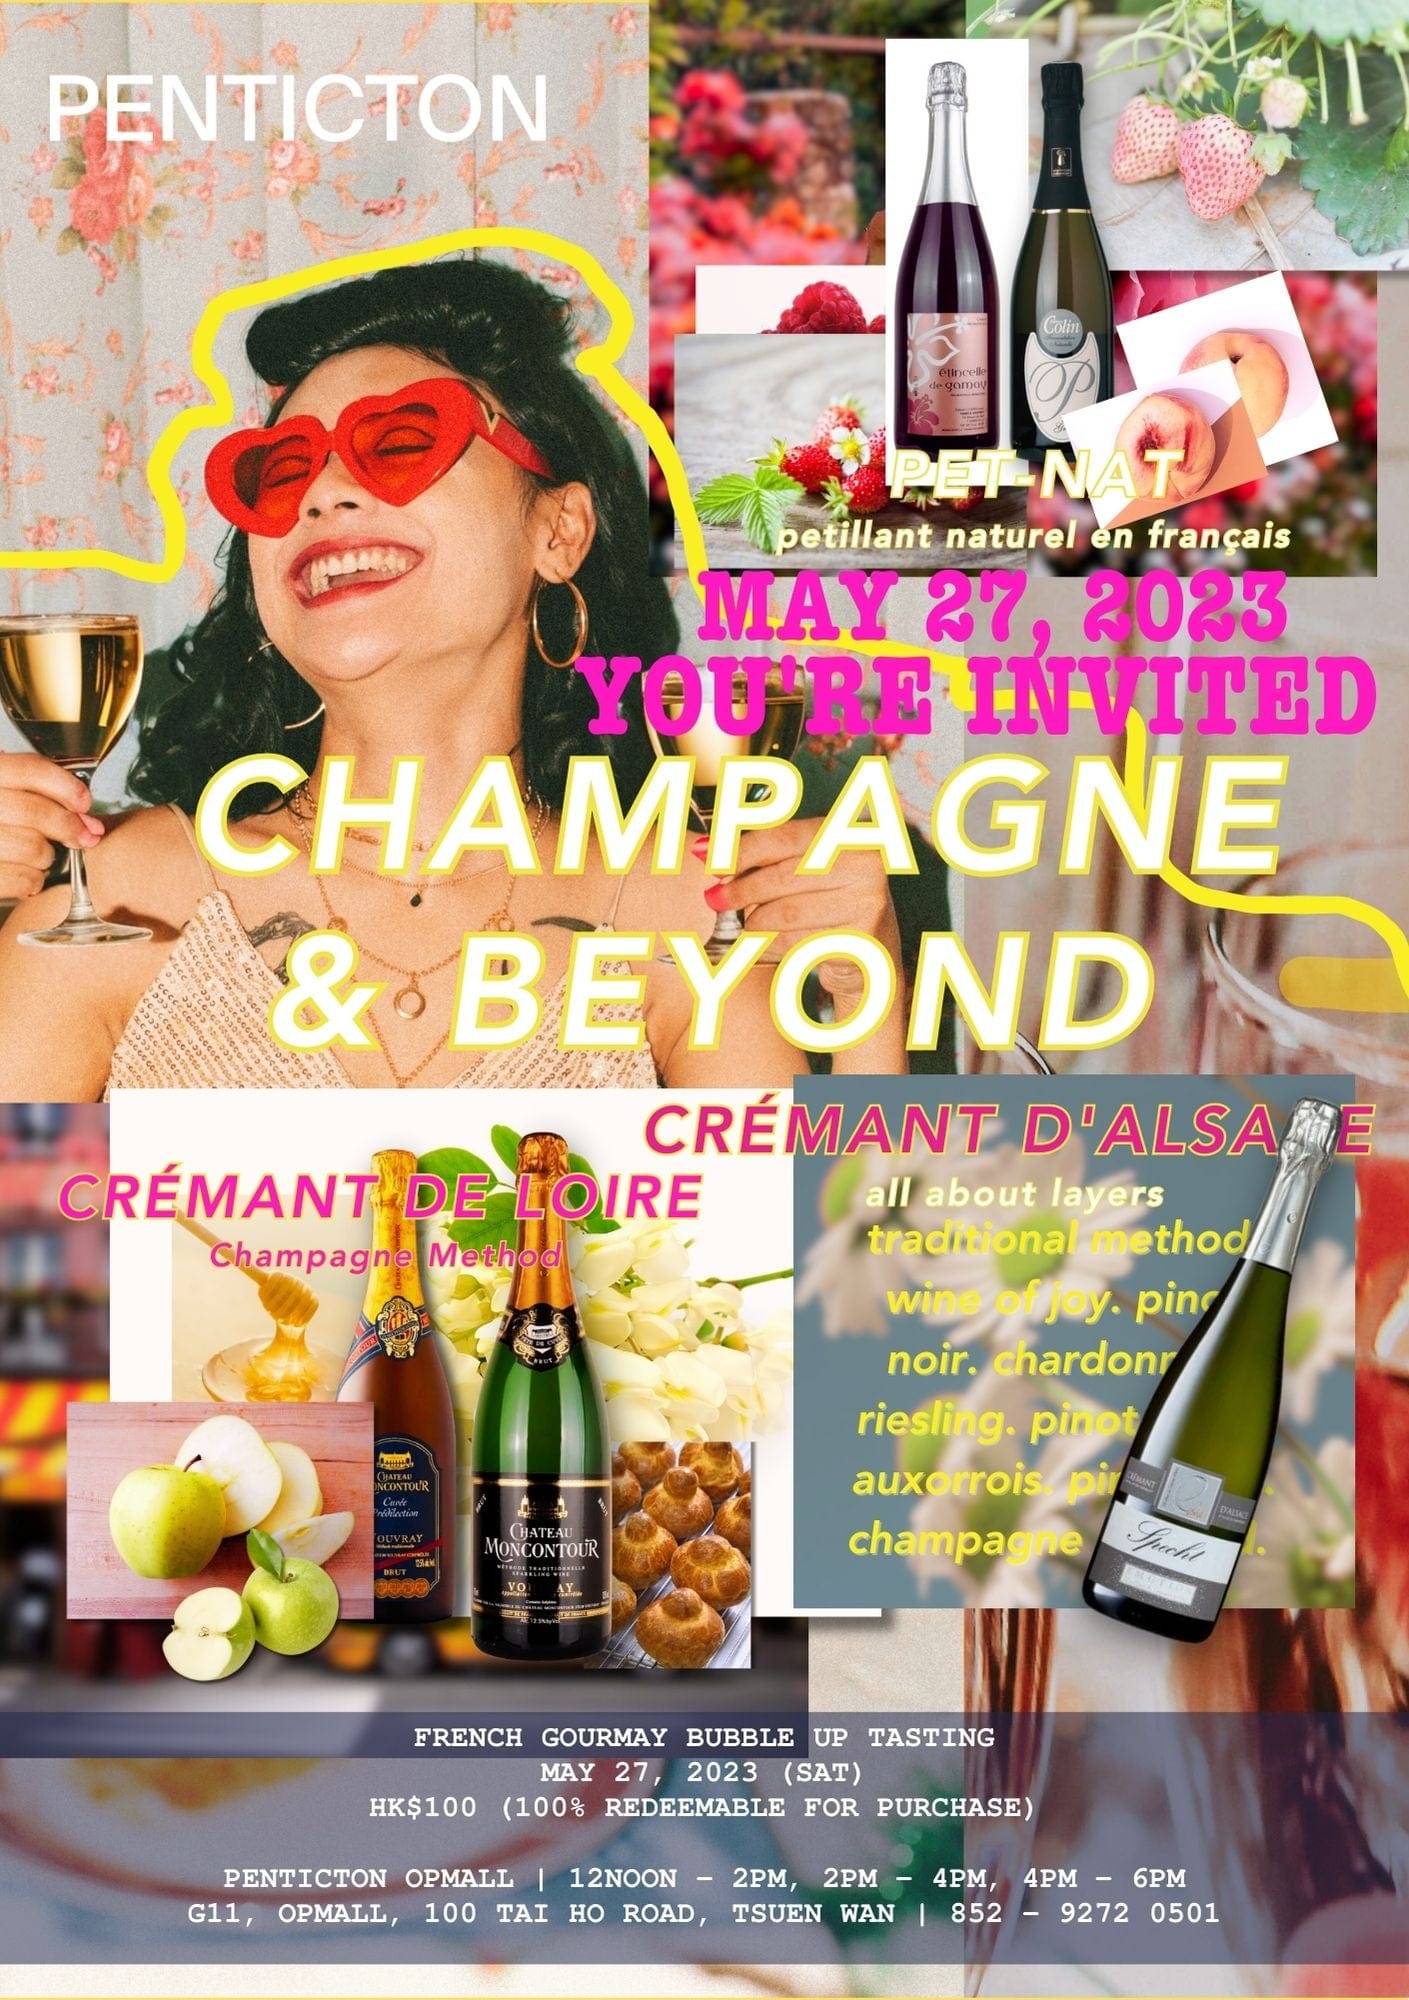 Shop PENTICTON Champagne & Beyond French Gourmay BubbleUP Tasting【Champagne & Beyond】法國五月品酒活動 online at PENTICTON artisanal French wine store in Hong Kong. Discover other French wines, promotions, workshops and featured offers at pentictonpacific.com 